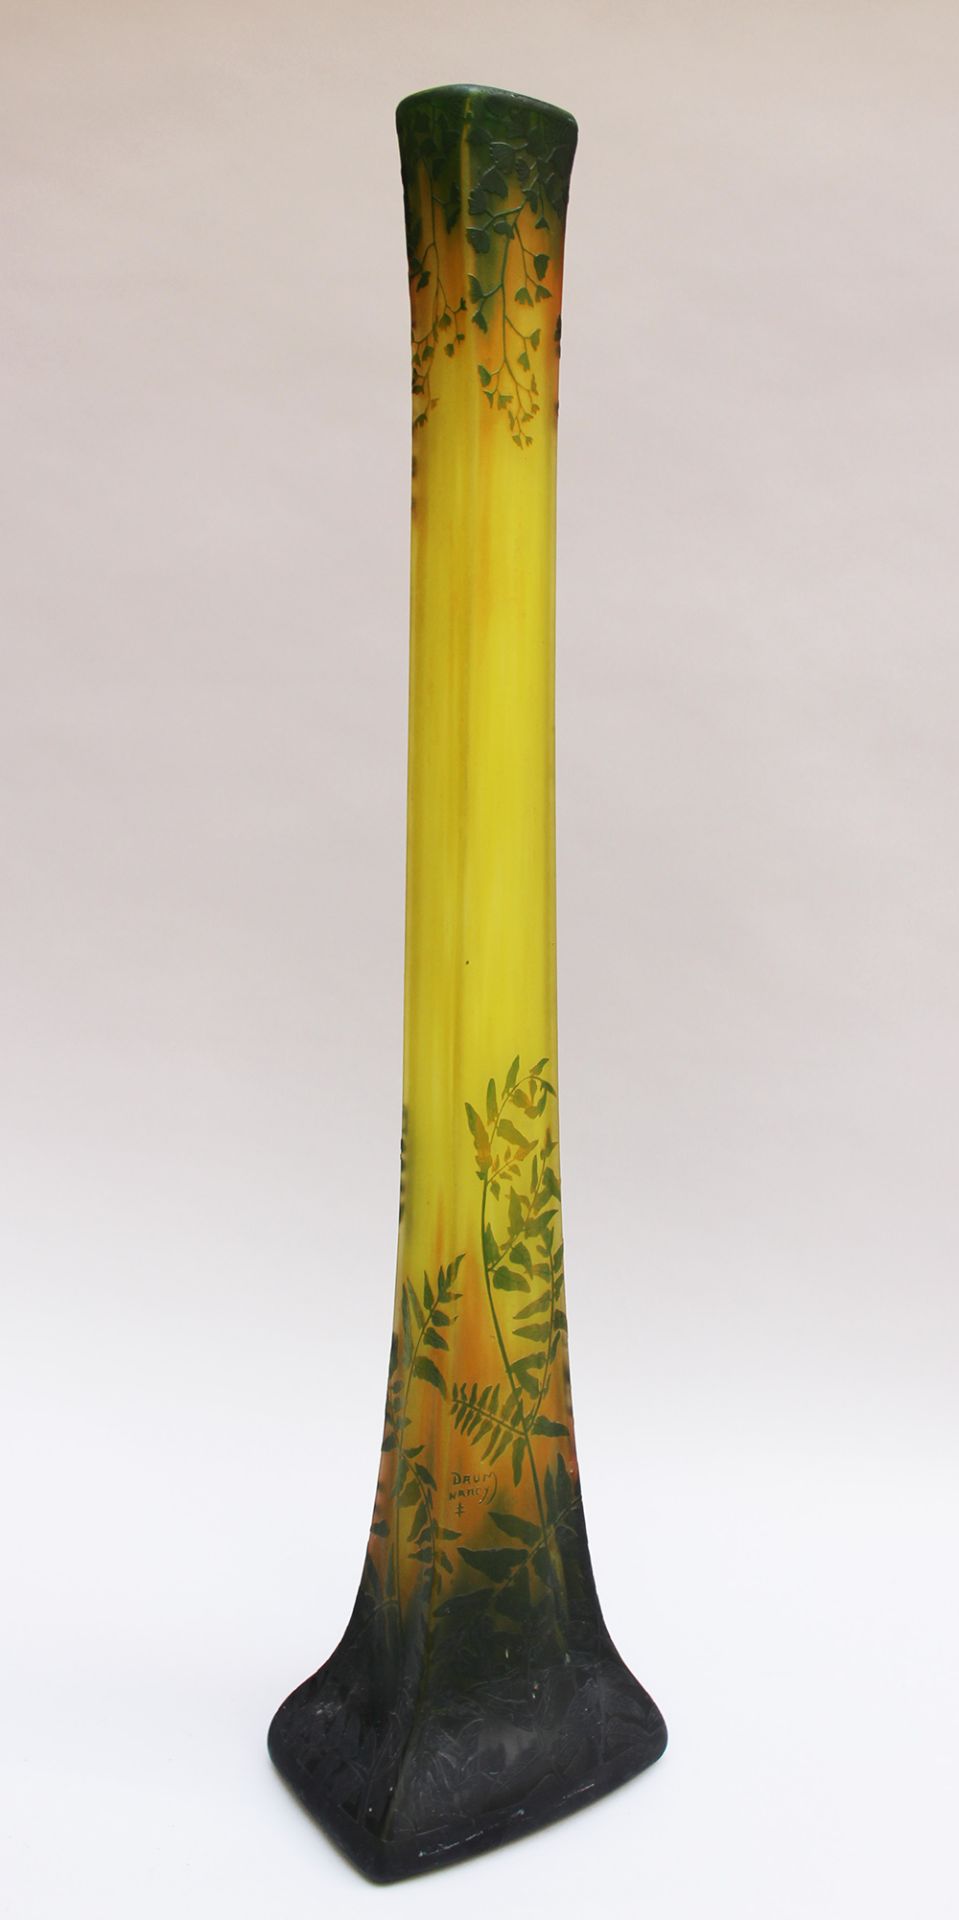 Daum (1890-1919) Nancy, Large glass Vase with long neck on shaped rectangular base green glass with 